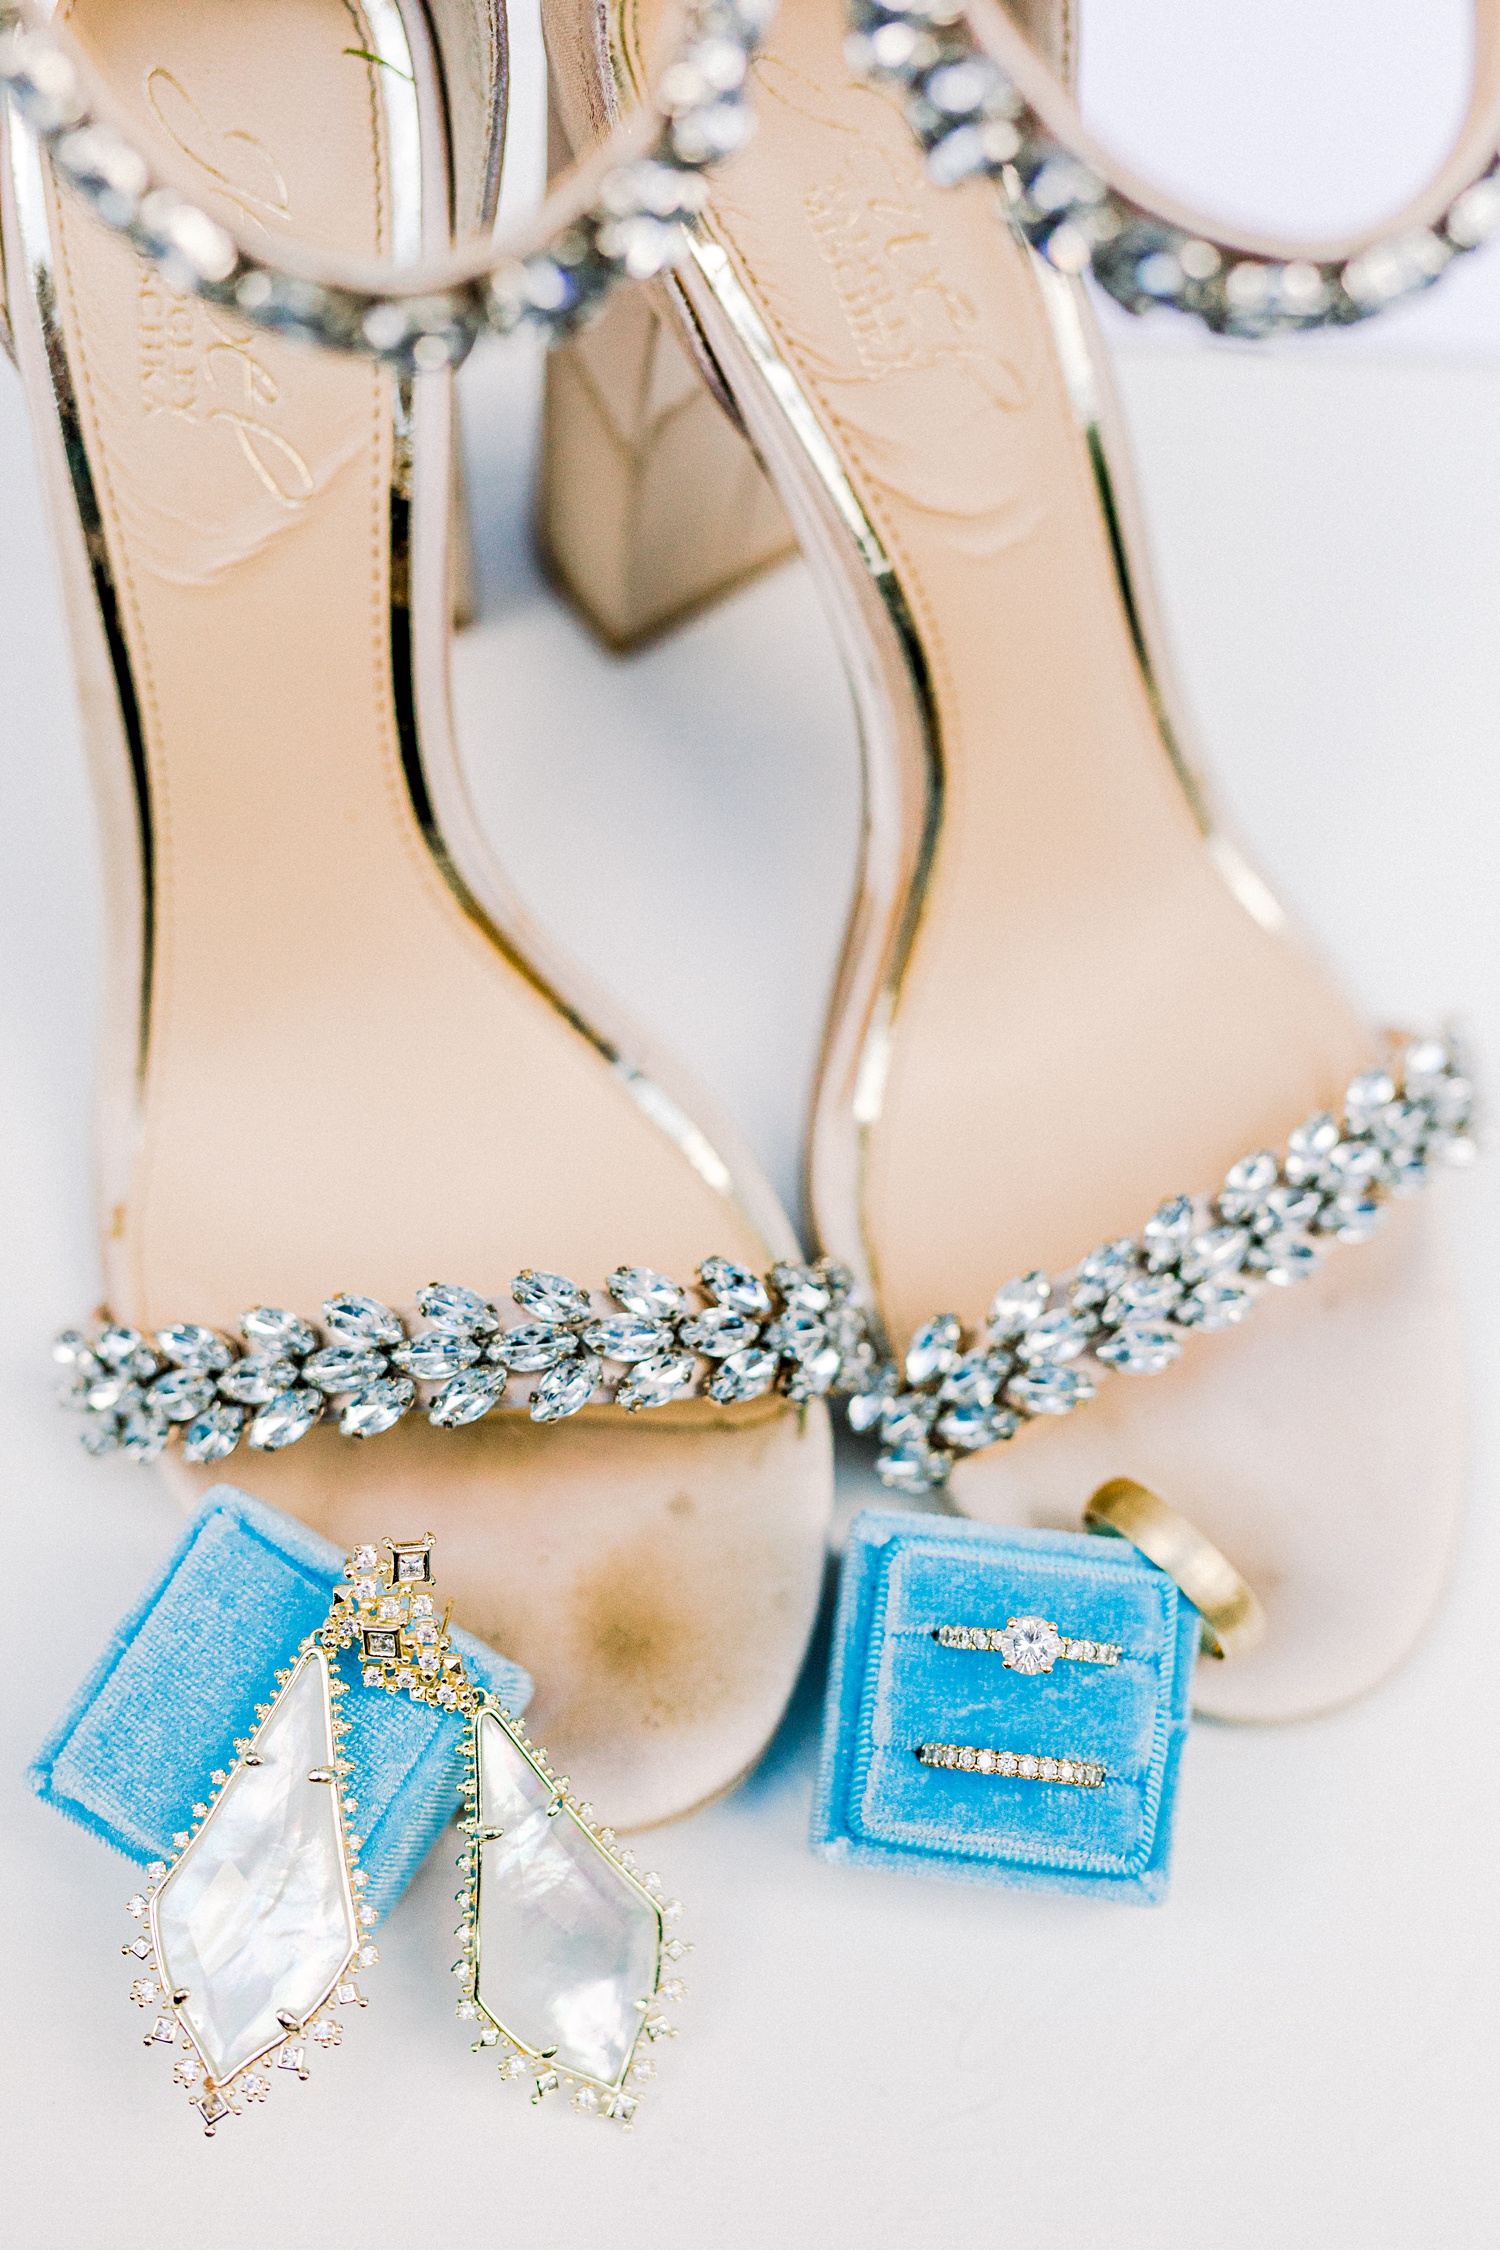 bride's rings rest in teal box during Douglas Manor wedding